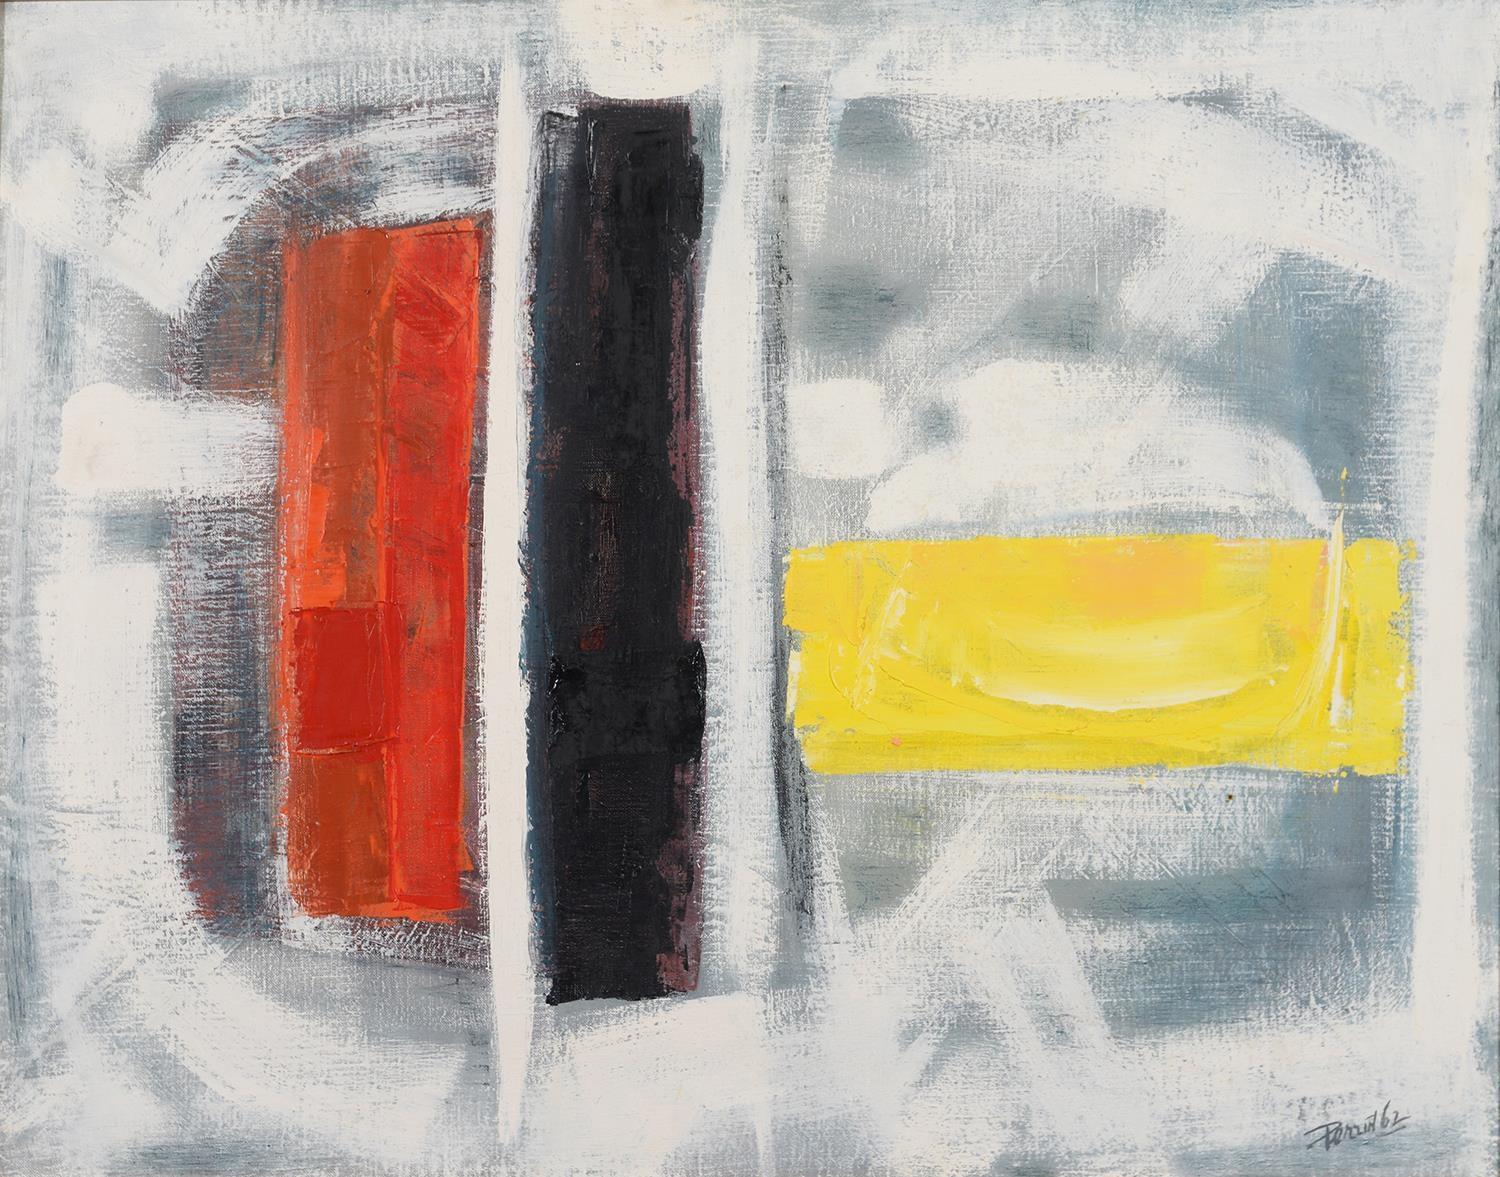 MODERN BRITISH SCHOOL, 1962 - UNTITLED (ABSTRACT), TWO, BOTH SIGNED (PERRIN) AND DATED '62, OIL ON